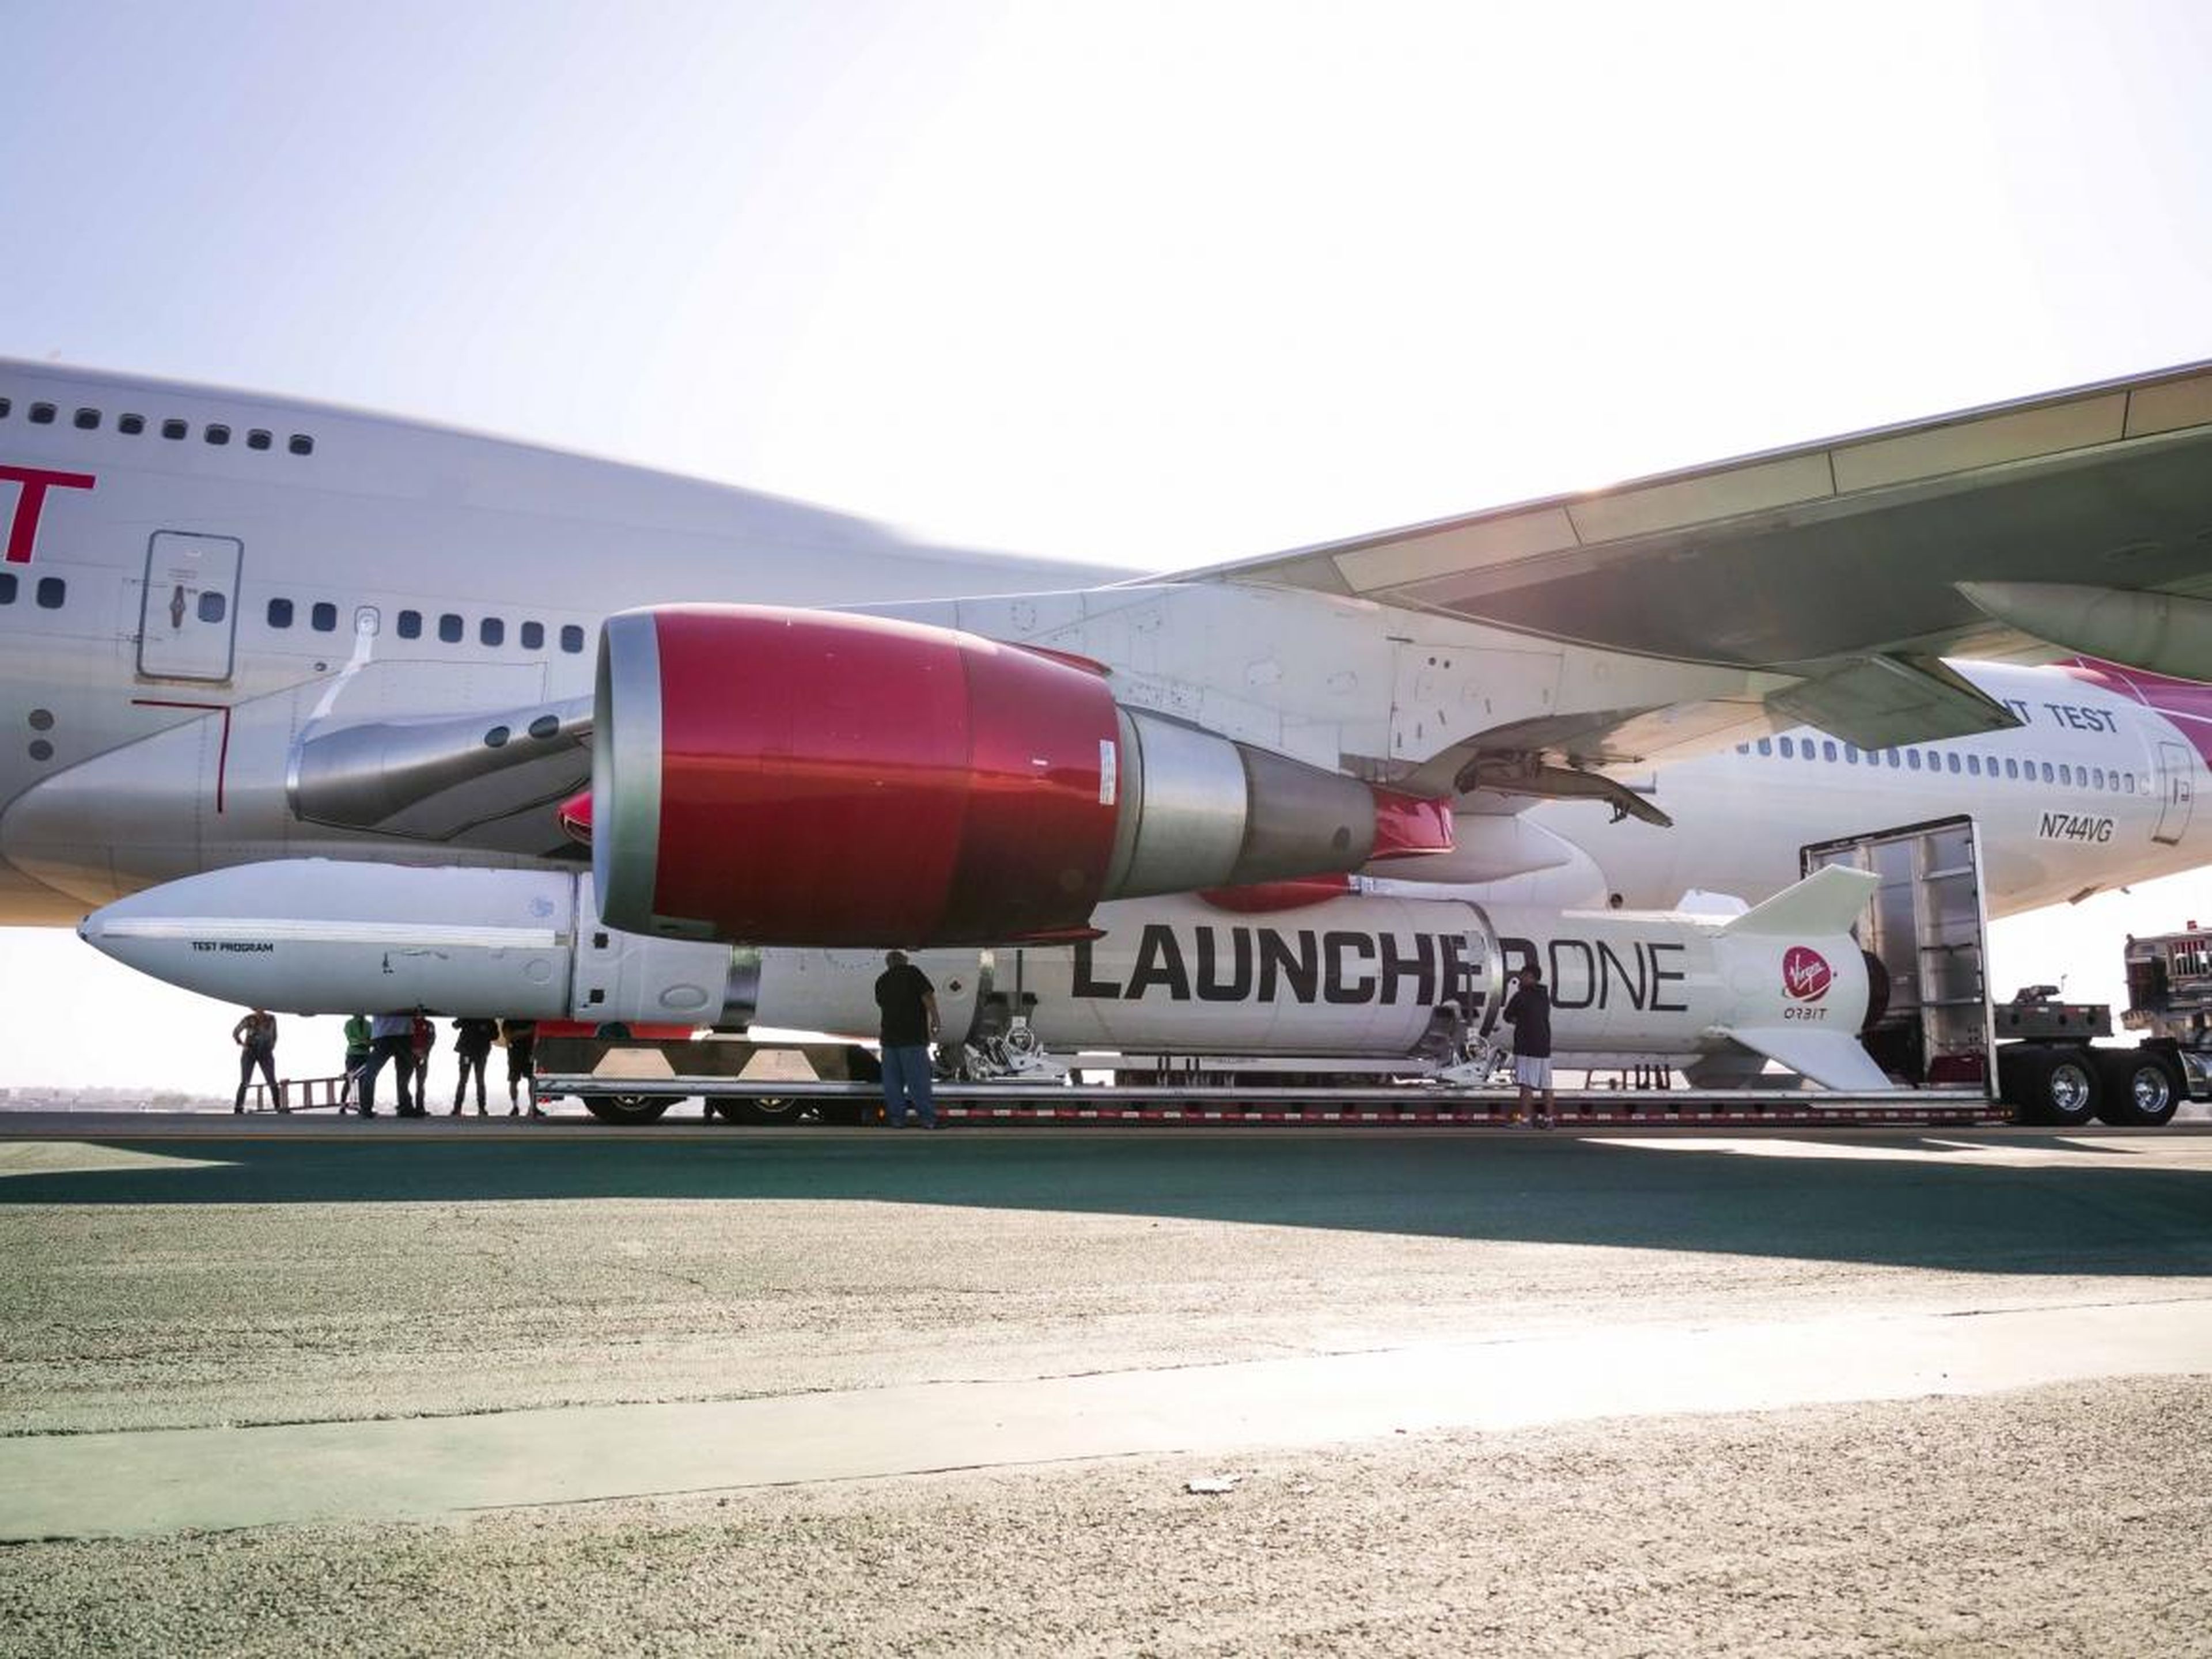 So Virgin Orbit has been busy designing, building, and testing LauncherOne's and Cosmic Girl's systems near Long Beach, California, and at the Mojave Air and Space Port.